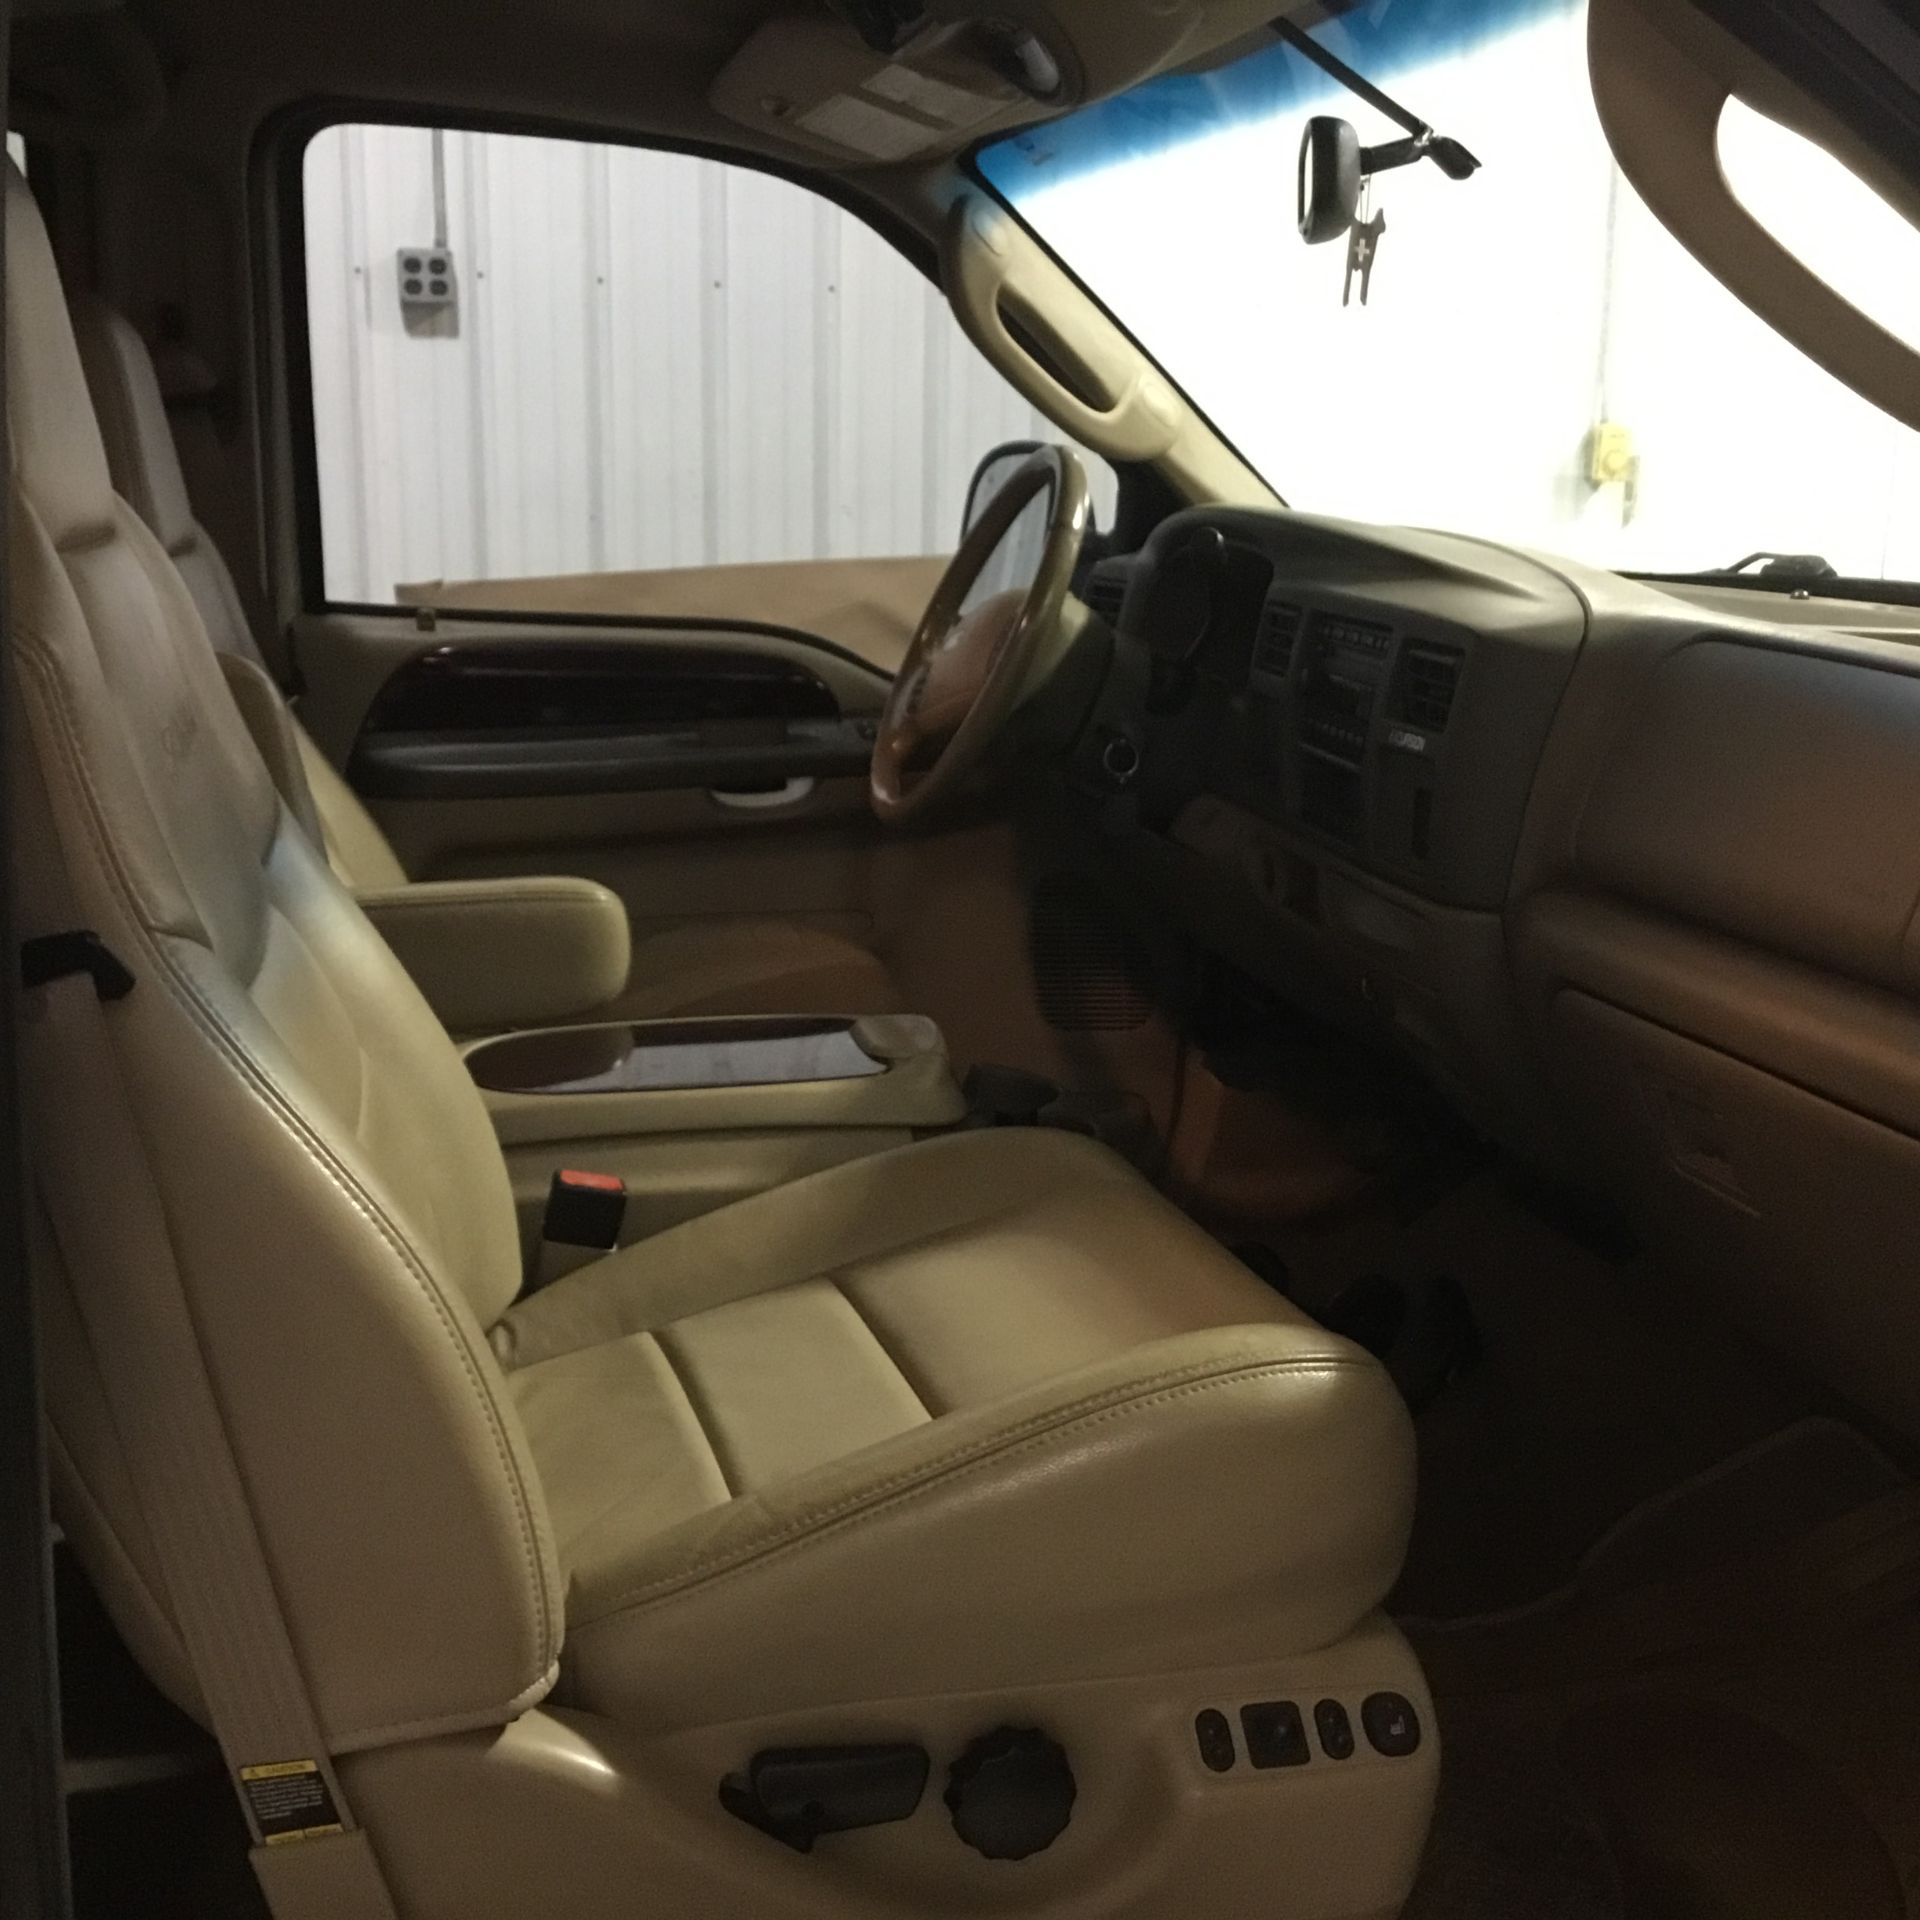 2004 Ford Excursion Limited, 6.0 Diesel, 4x4, 205,000 Miles, Vin 1C4NJPBB2HD103824, Tan, Good - Image 5 of 12